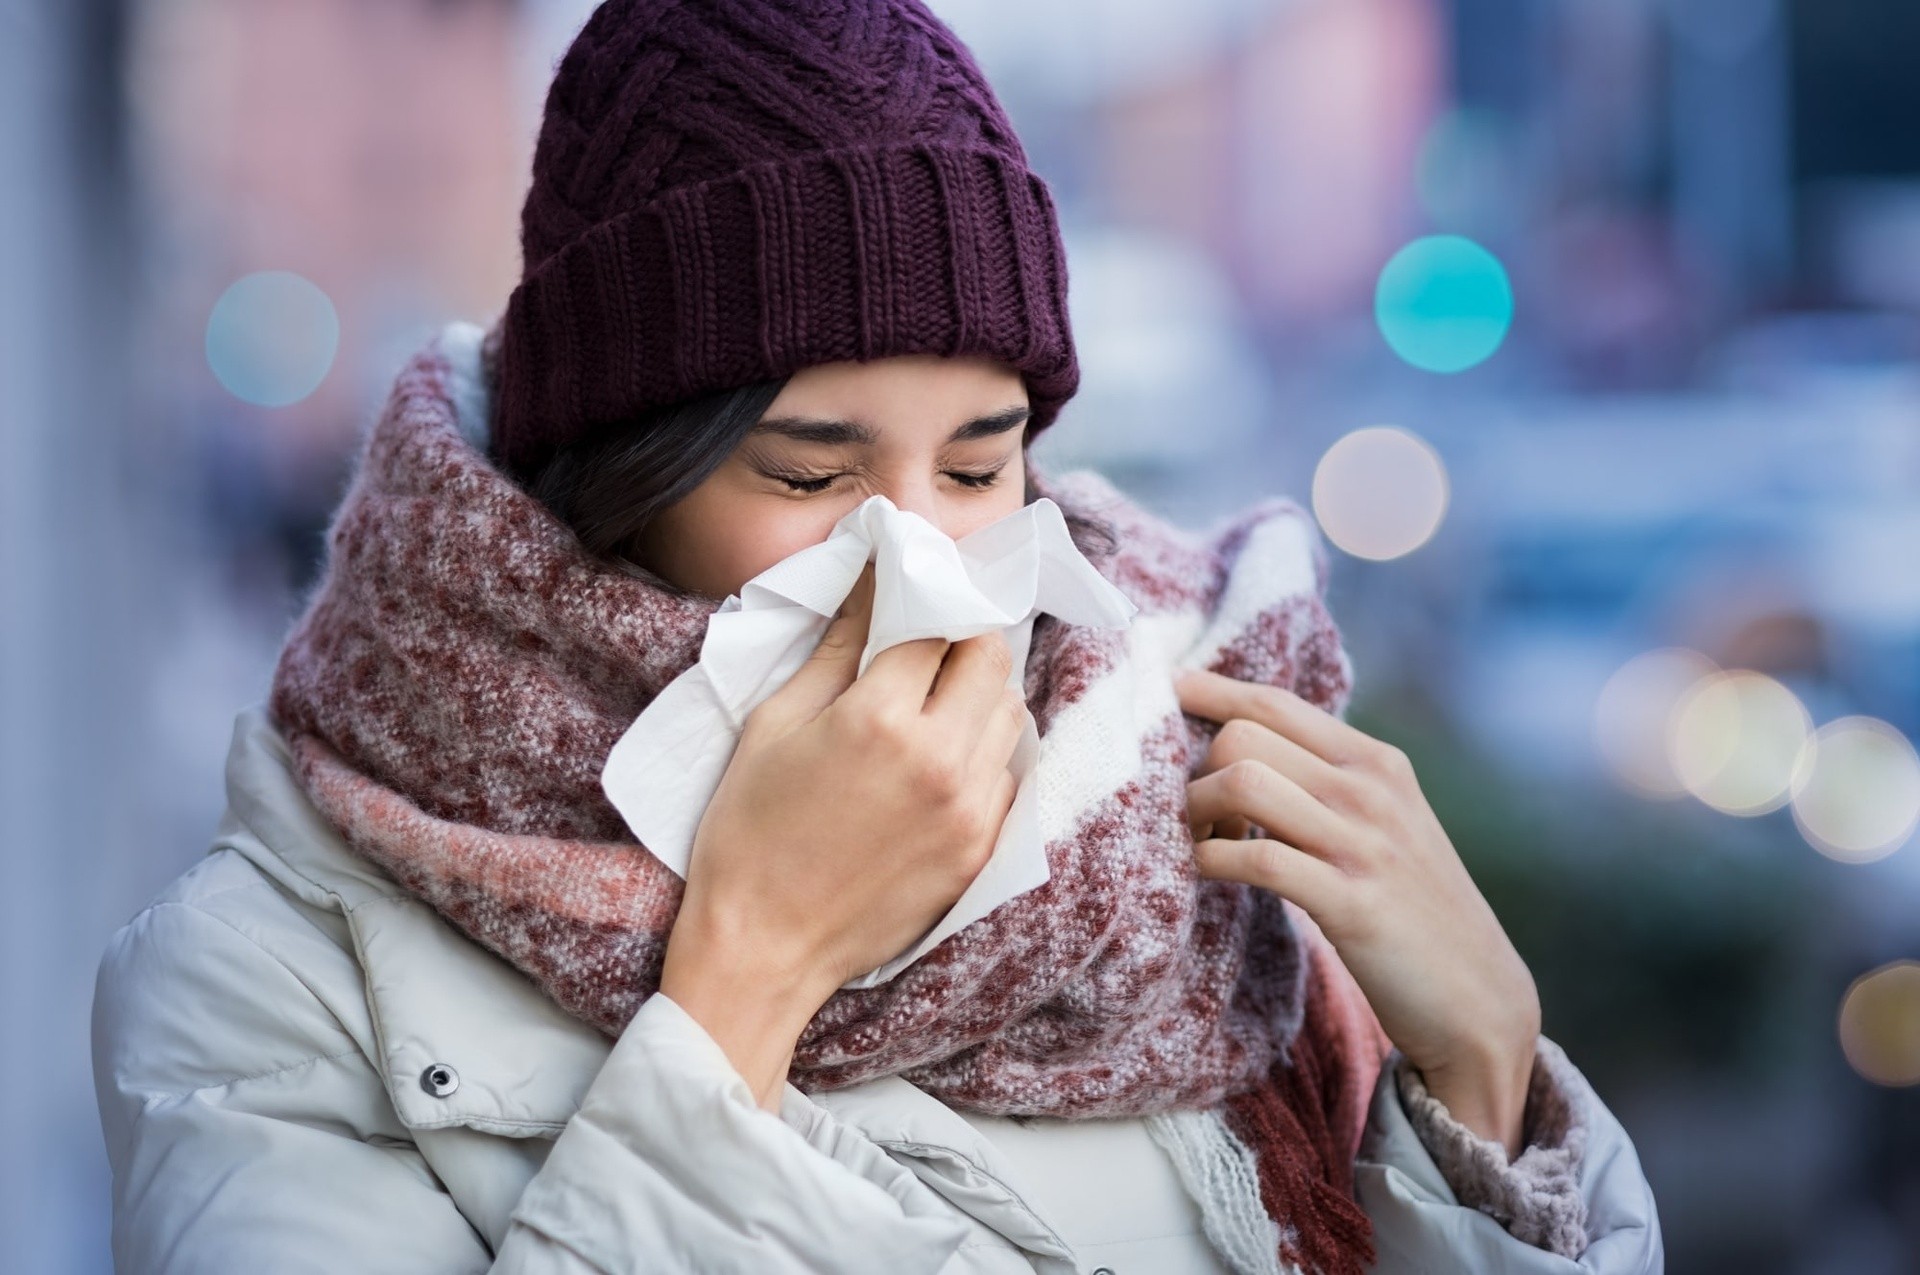 Why Do We Get Flu Easily in Winter?